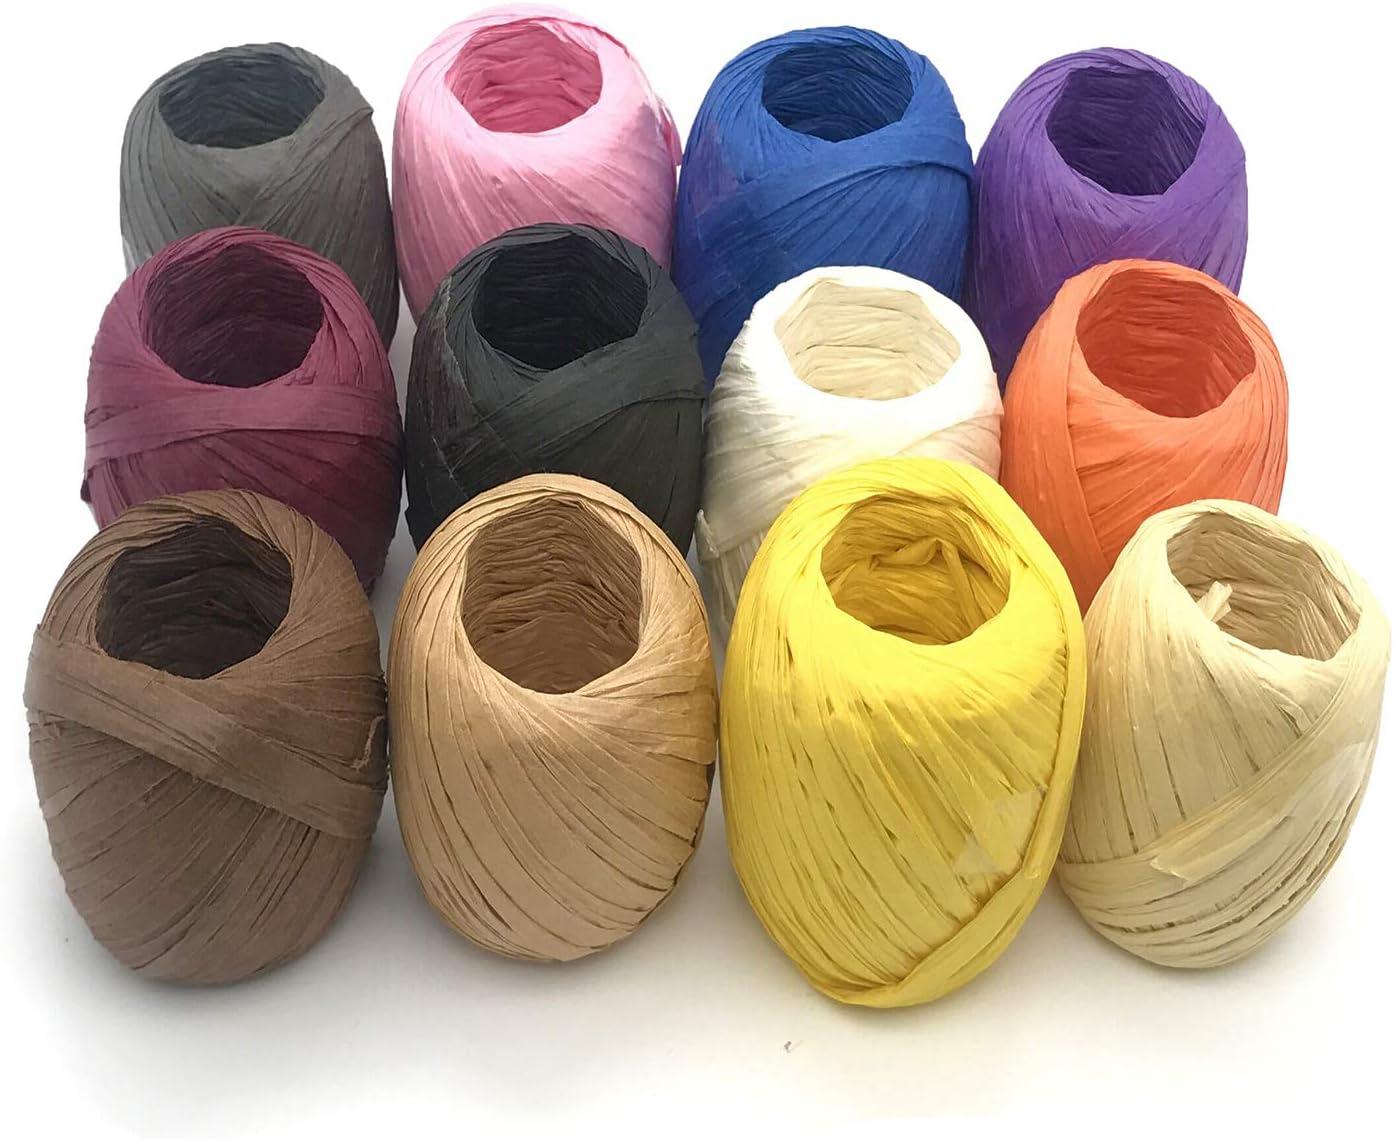 Premium Photo  Hemp rope for crafts or hobbies and bouquets